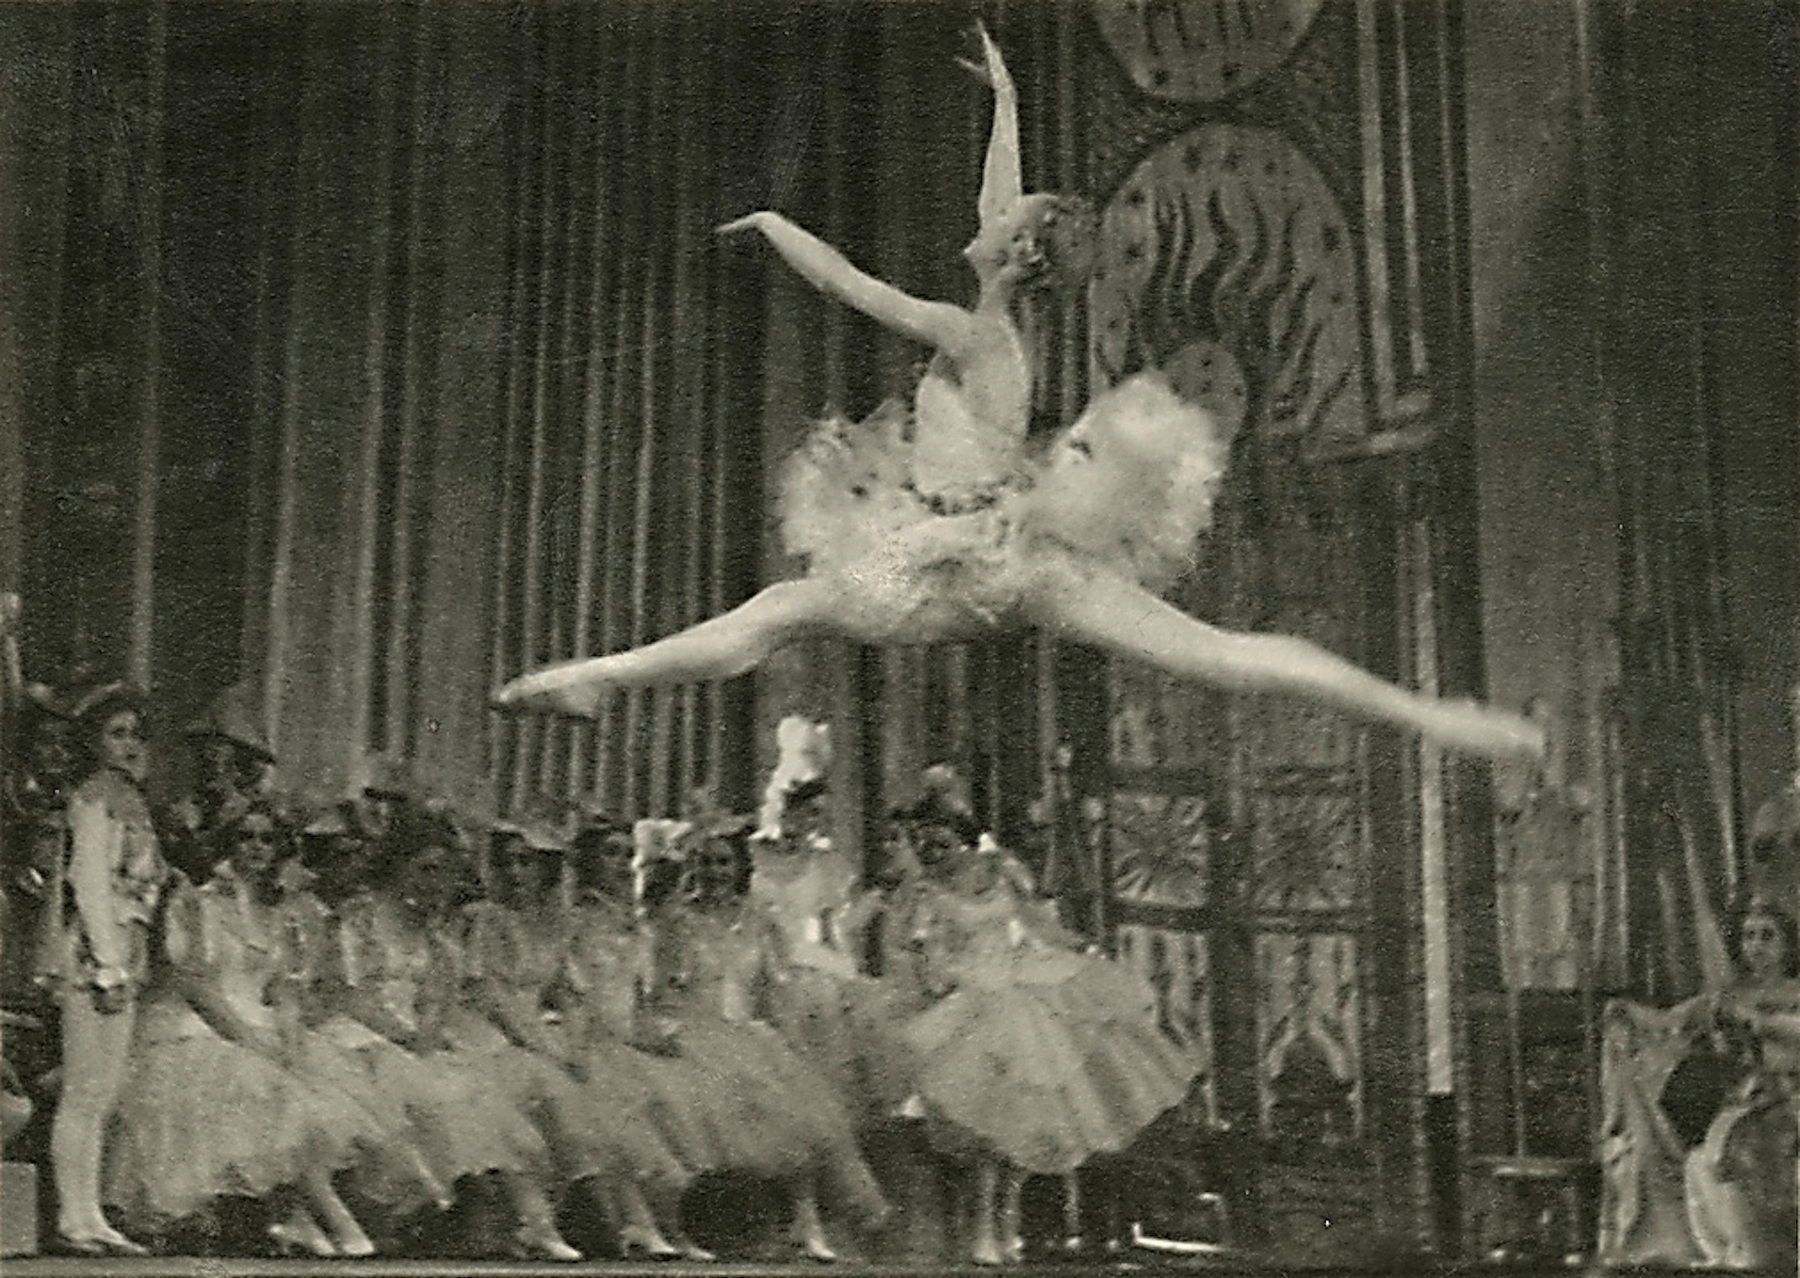 A Collection of Photographs of the Bolshoi Theatre Ballet Dancers